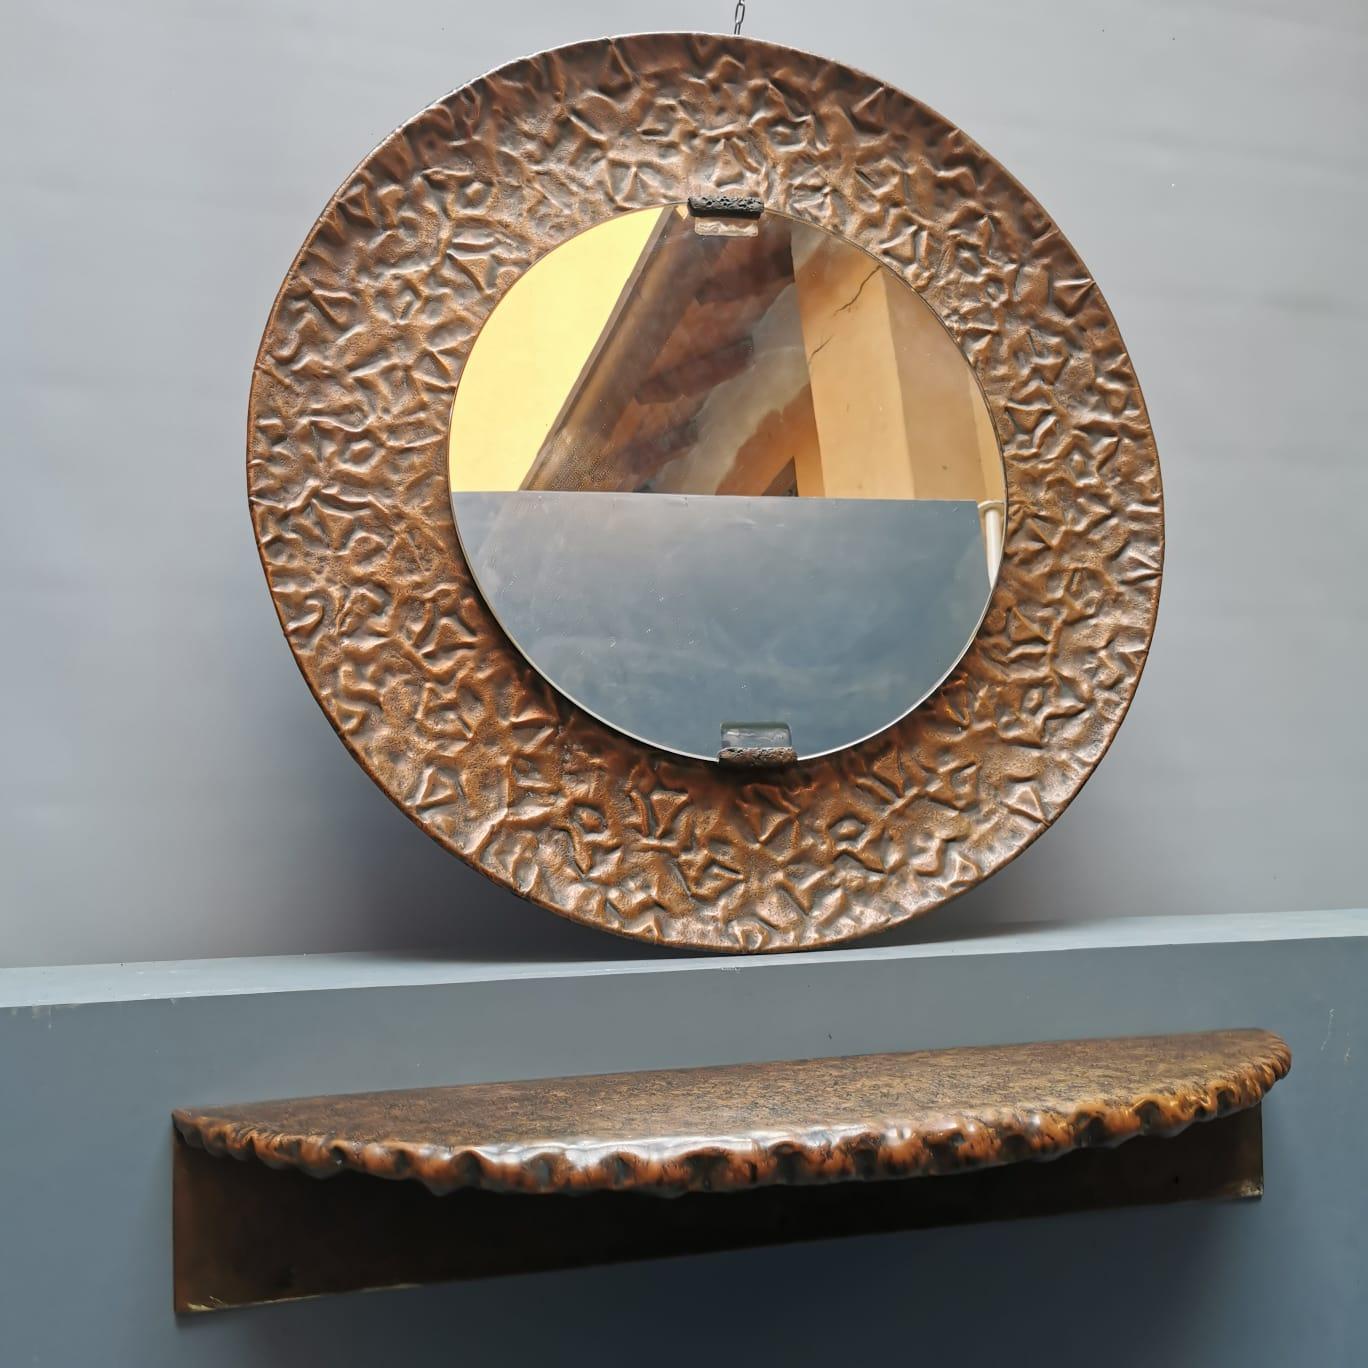 Mirrored crystal wall mirror with cantilevered and hammered copper frame with cantilevered copper shelf made by Angelo Bragalini, sculptor, goldsmith, decorator, painter and designer. Working with a spectrum of materials and using techniques such as